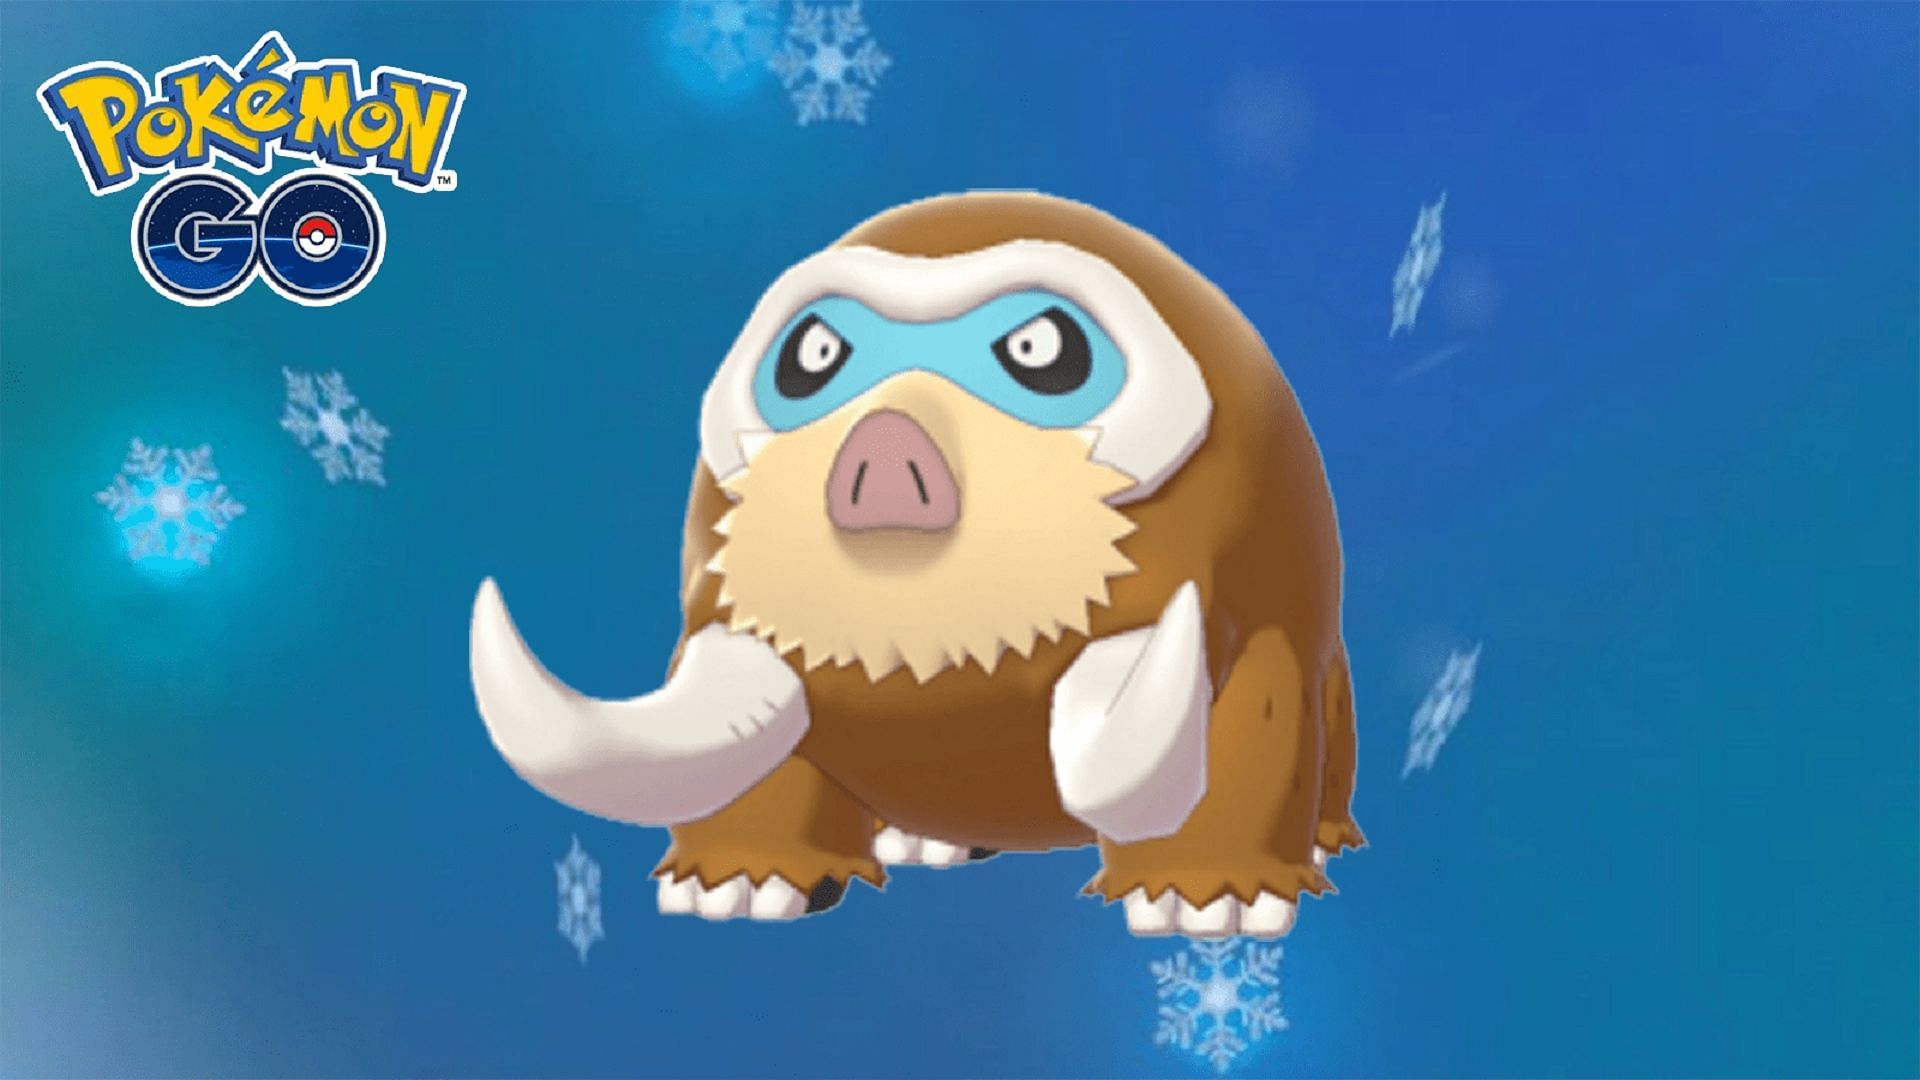 Ice-types like Mamoswine can deal severe damage to Dragonite in any battle (Image via Niantic)